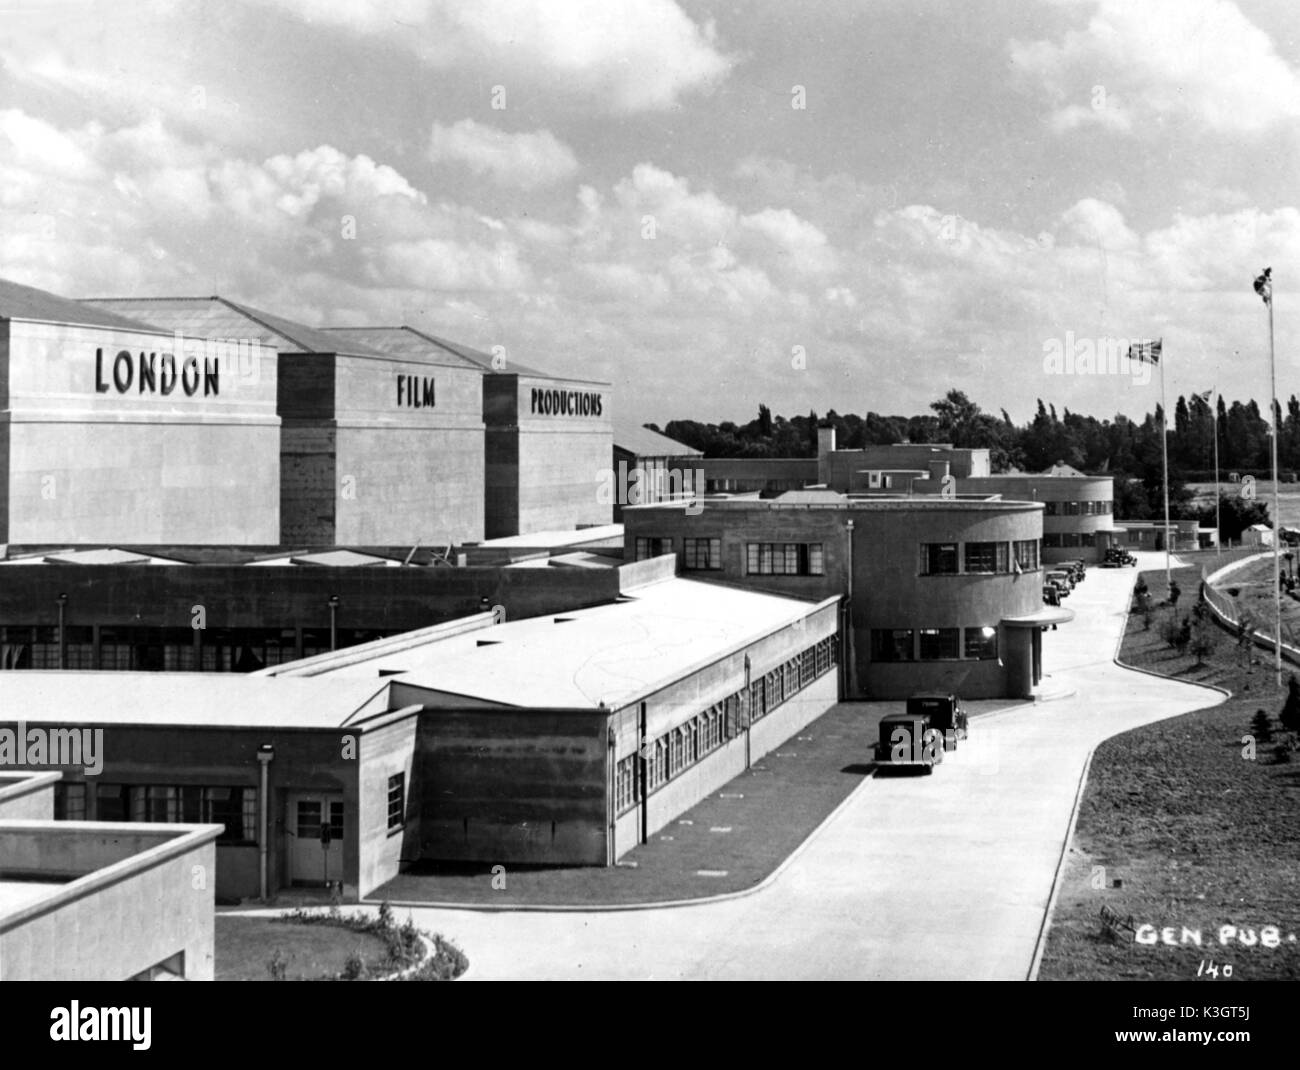 LONDON FILM PRODUCTIONS AT DENHAM STUDIOS: a general view of the studios, showing the immense size of the buildings which cover over 28 acres of the 165 acre estate. There are seven sound stages, two of which are air-conditioned and the largest in Europe. LONDON FILM PRODUCTIONS at DENHAM STUDIOS a general view of the studios, showing the immense size of the buildings which cover over 28 acres of the 165 acre estate. There are seven sound stages, two of which are air-conditioned and the largest in Europe. Stock Photo